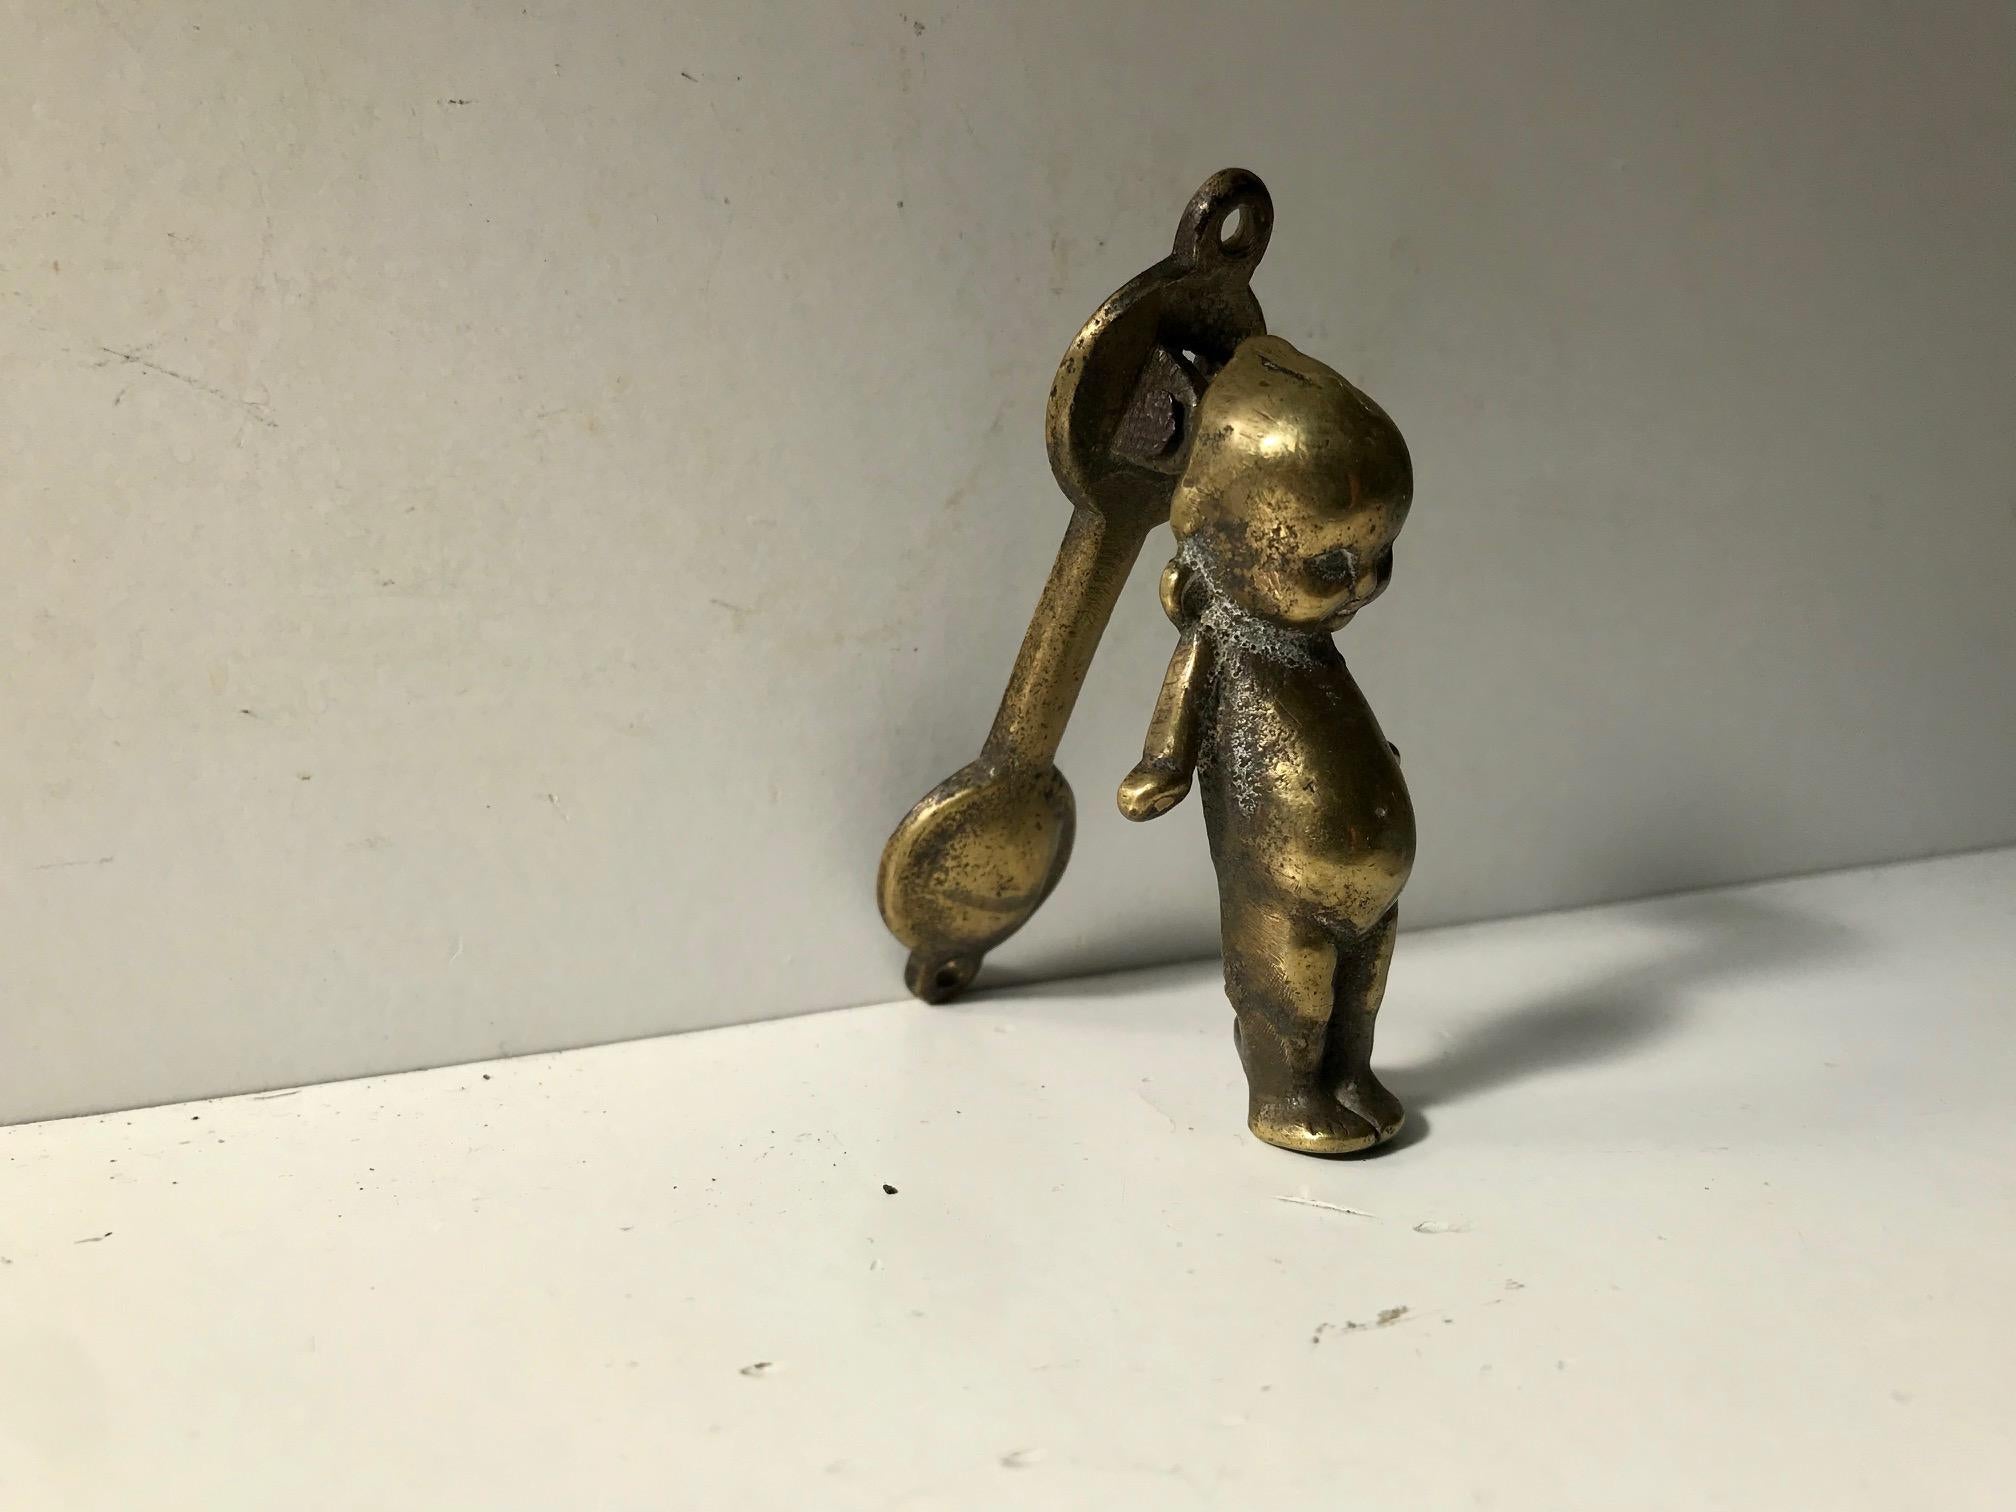 Small yet detailed and well-patinated door knocker in brass. Manufactured in Europe, probably, England during the early to mid-19th century. It has a charming patina and ware indicative of being handled and receptively touched and used for well over